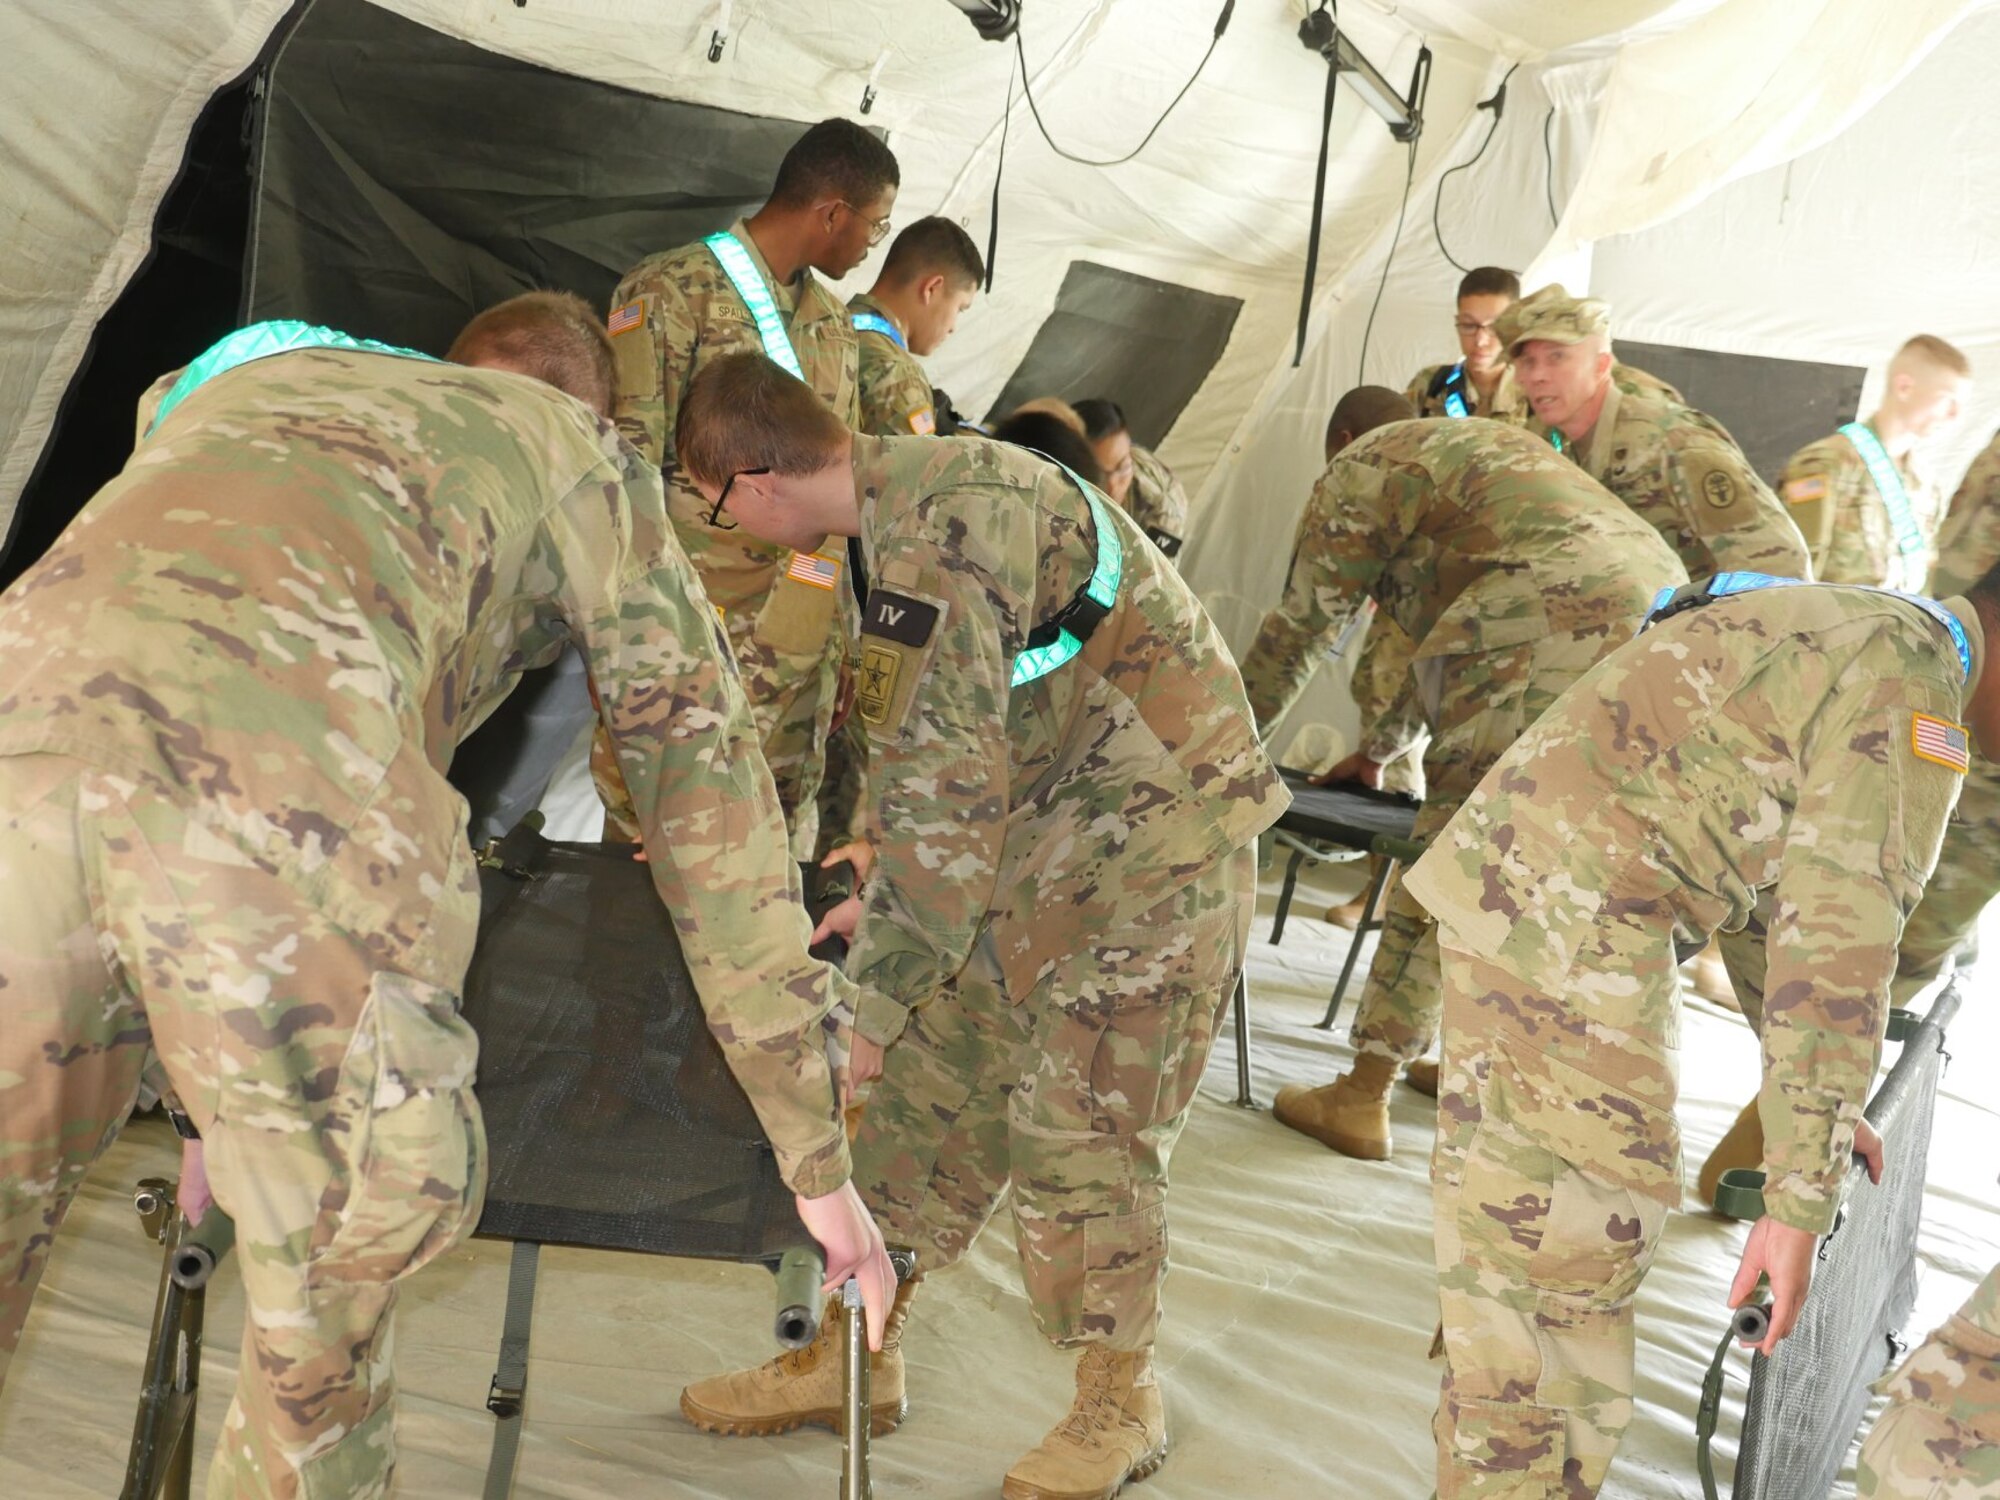 Soldiers set up tent